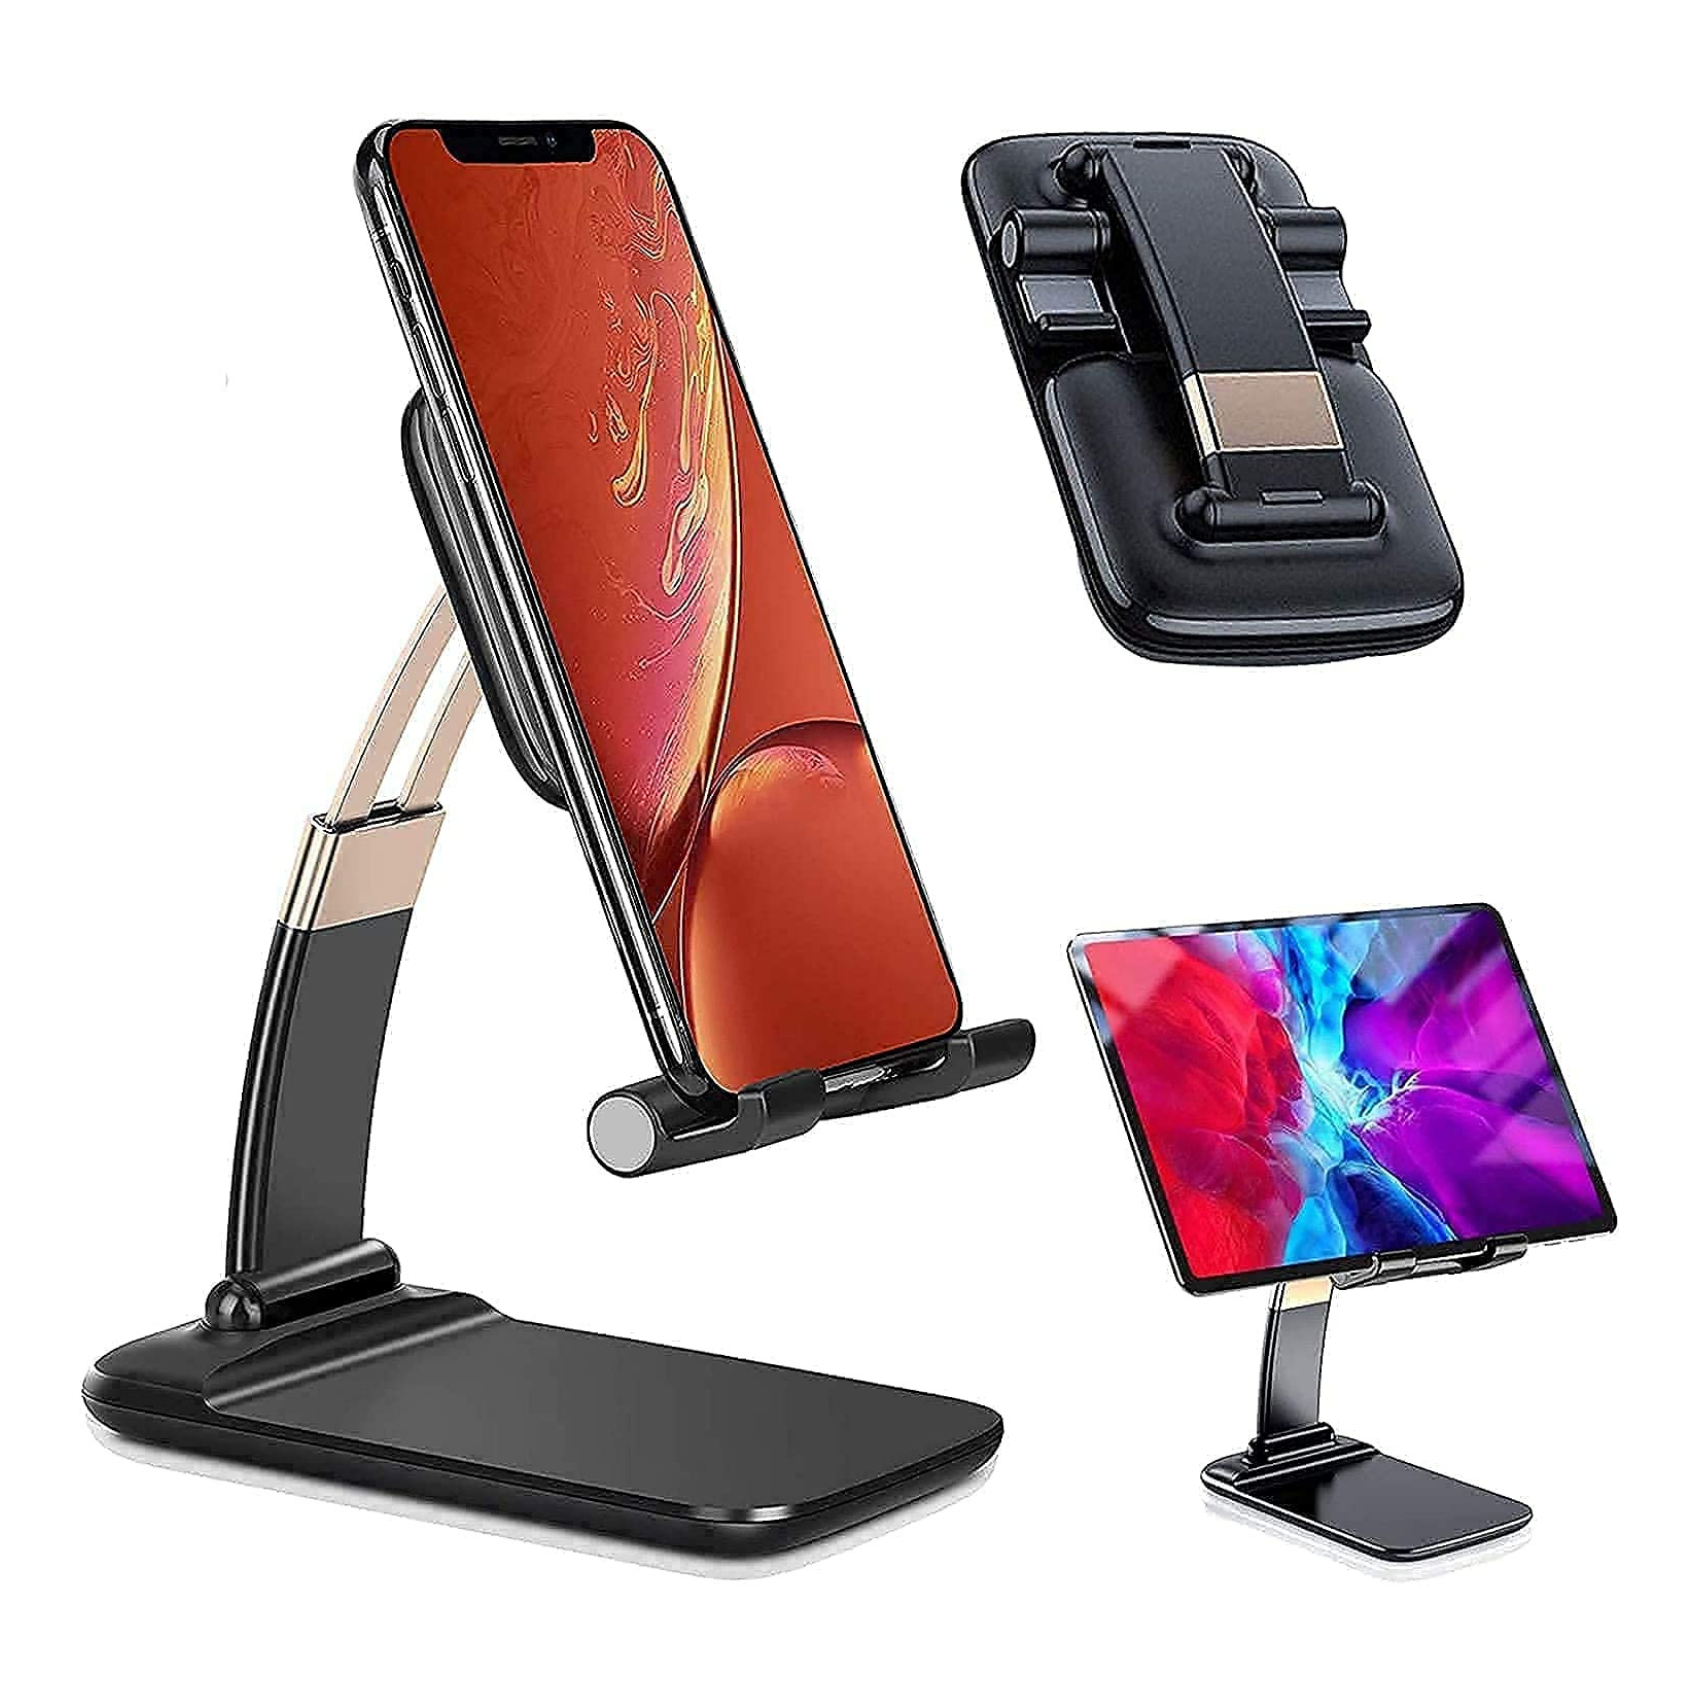 Adjustable Mobile Stand for Home & Office